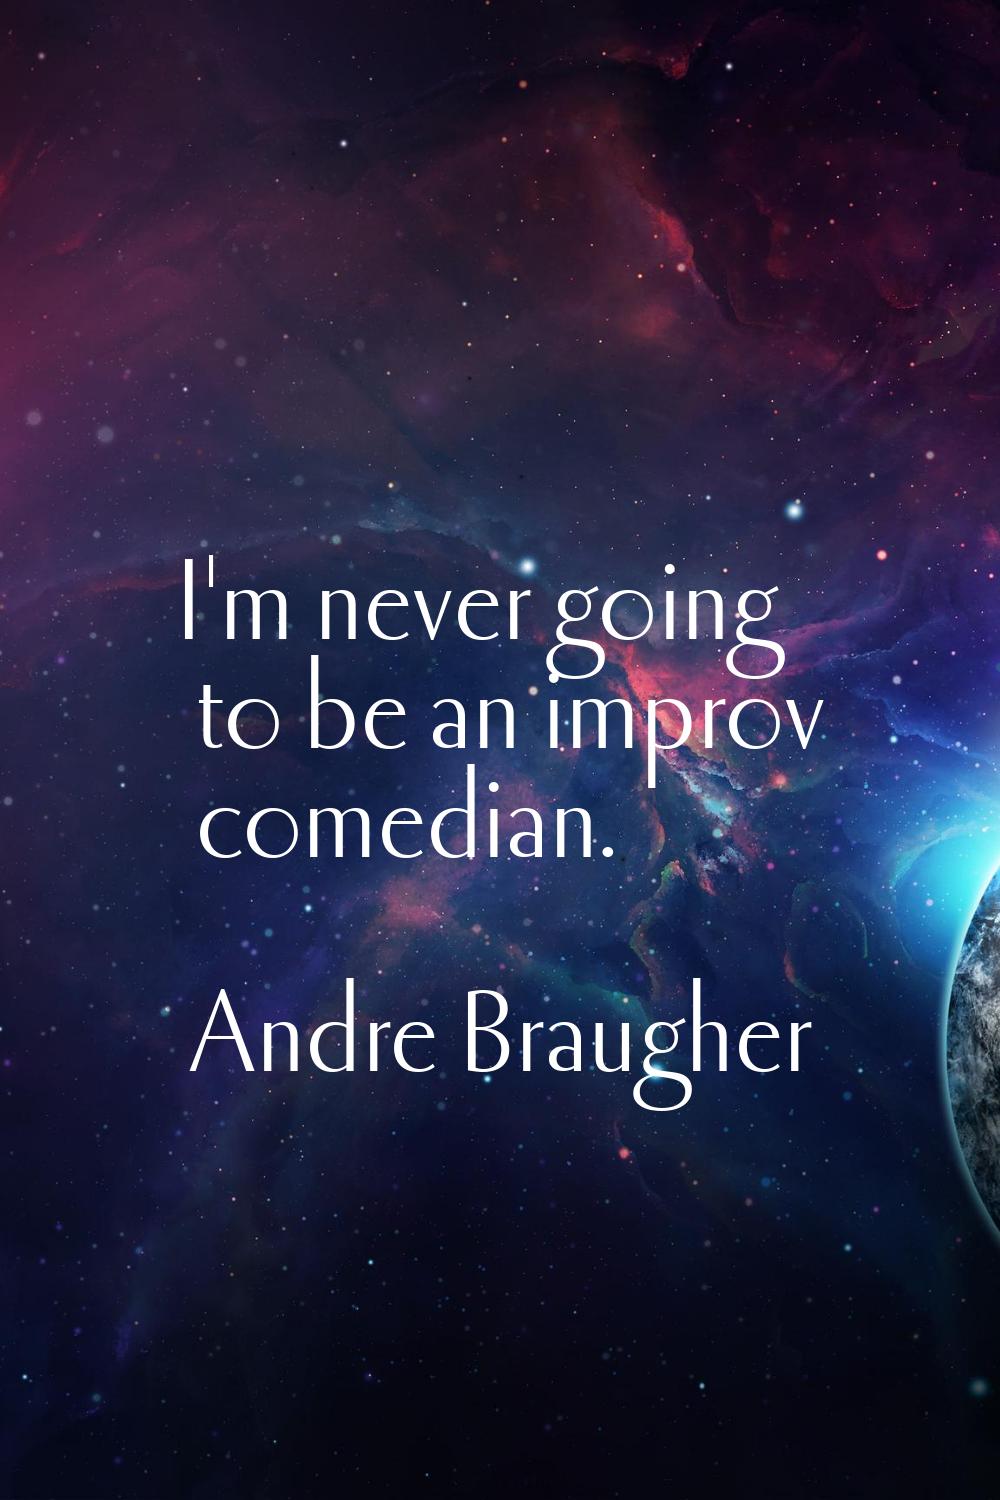 I'm never going to be an improv comedian.